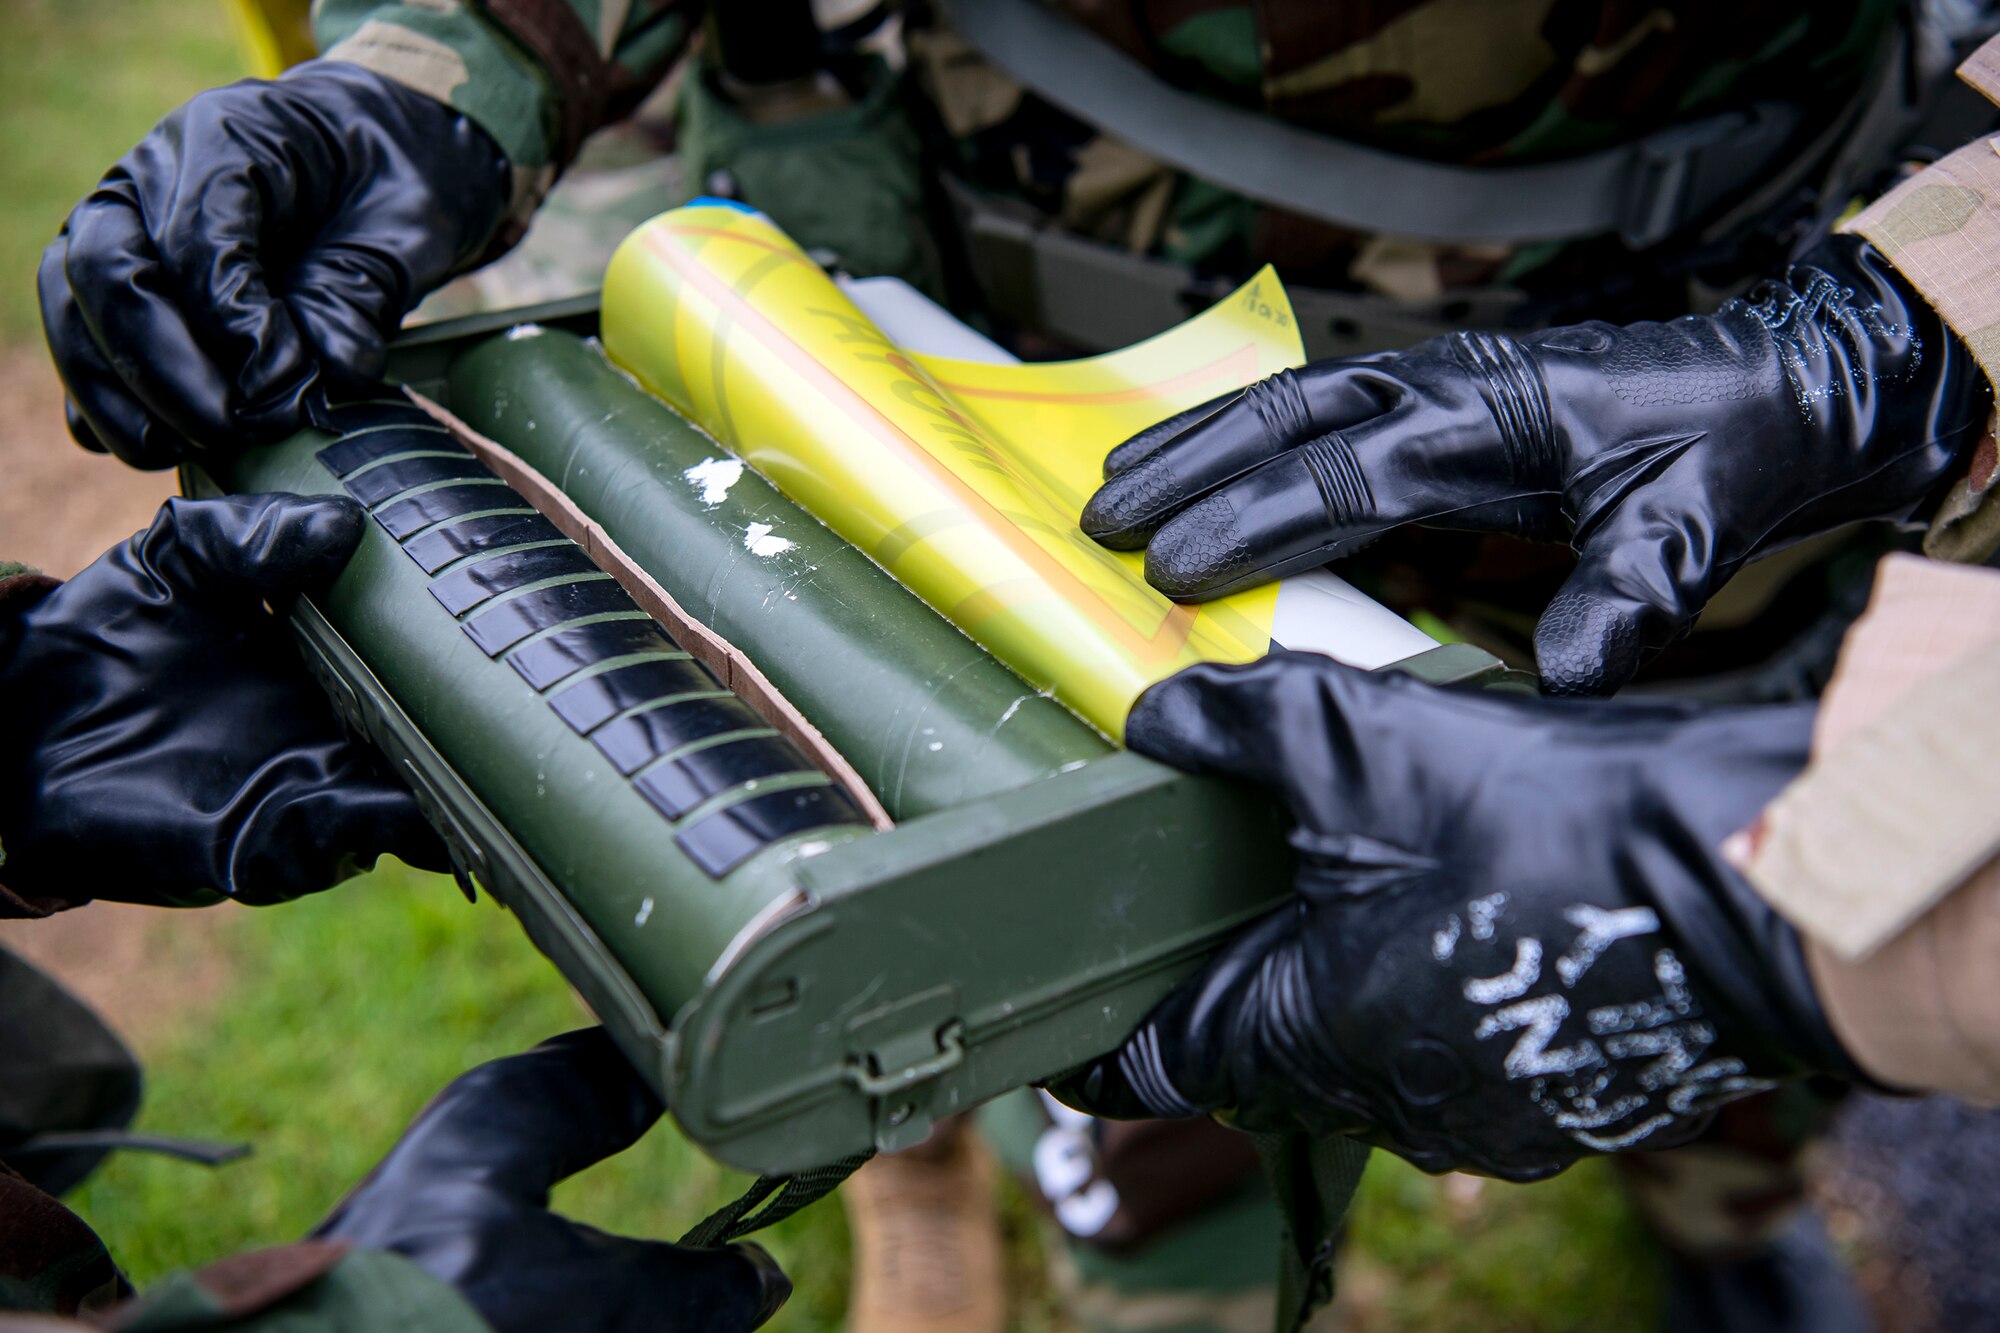 Airmen from the 423d Civil Engineer Squadron, grab a marking sign for an exercise at RAF Alconbury, England, May 19, 2022. The exercise was geared towards training Airmen on how to properly control and examine a contaminated area after a simulated chemical attack while in Mission Oriented Protective Posture Gear. (U.S. Air Force photo by Staff Sgt. Eugene Oliver)